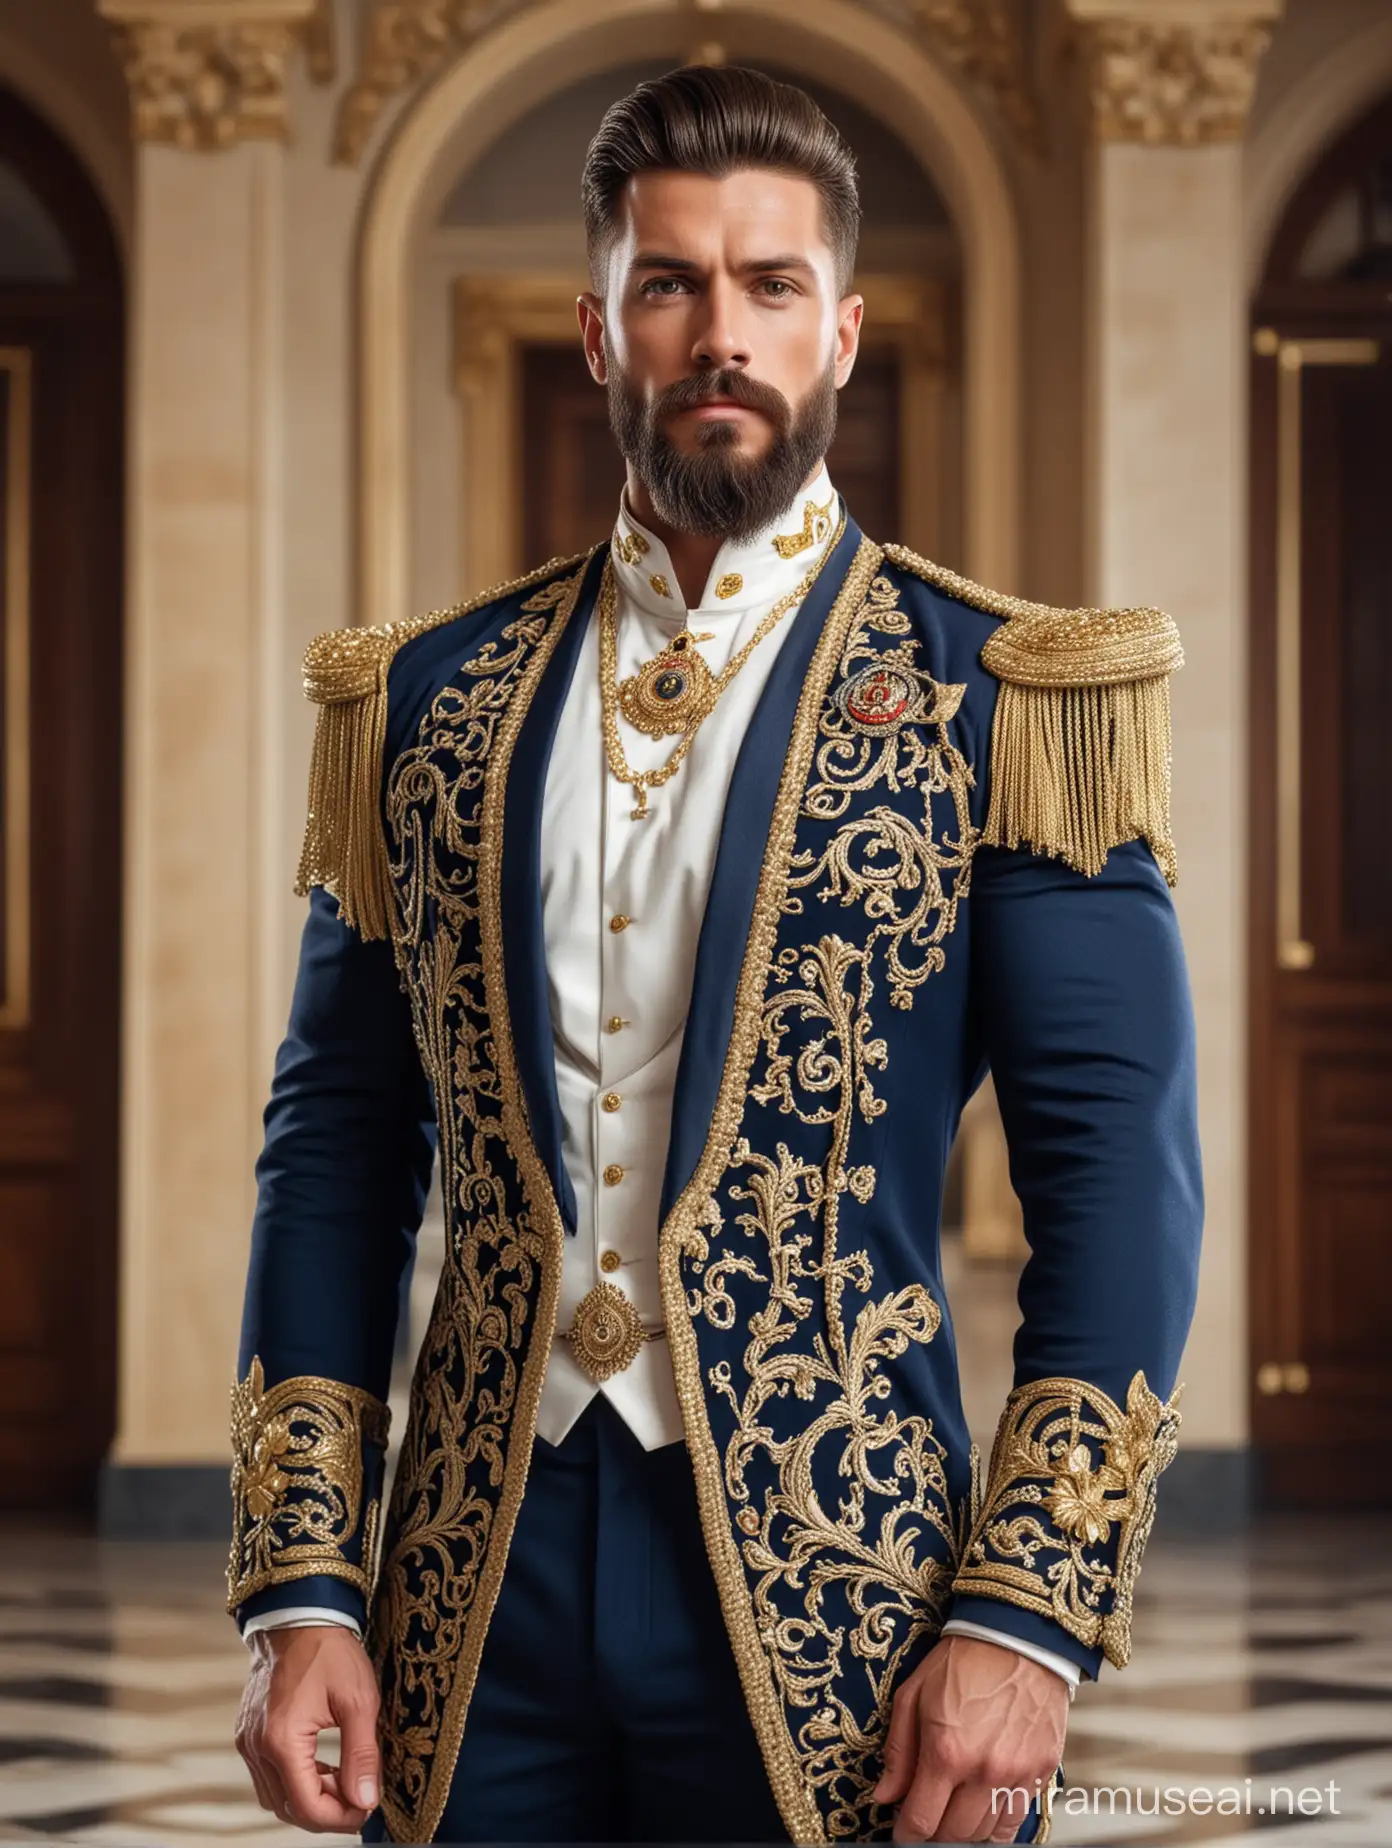 Tall and handsome bodybuilder king with beautiful hairstyle and beard with attractive eyes and Big wide shoulder in navy, white and golden cavalry suit with necklace standing inside palace